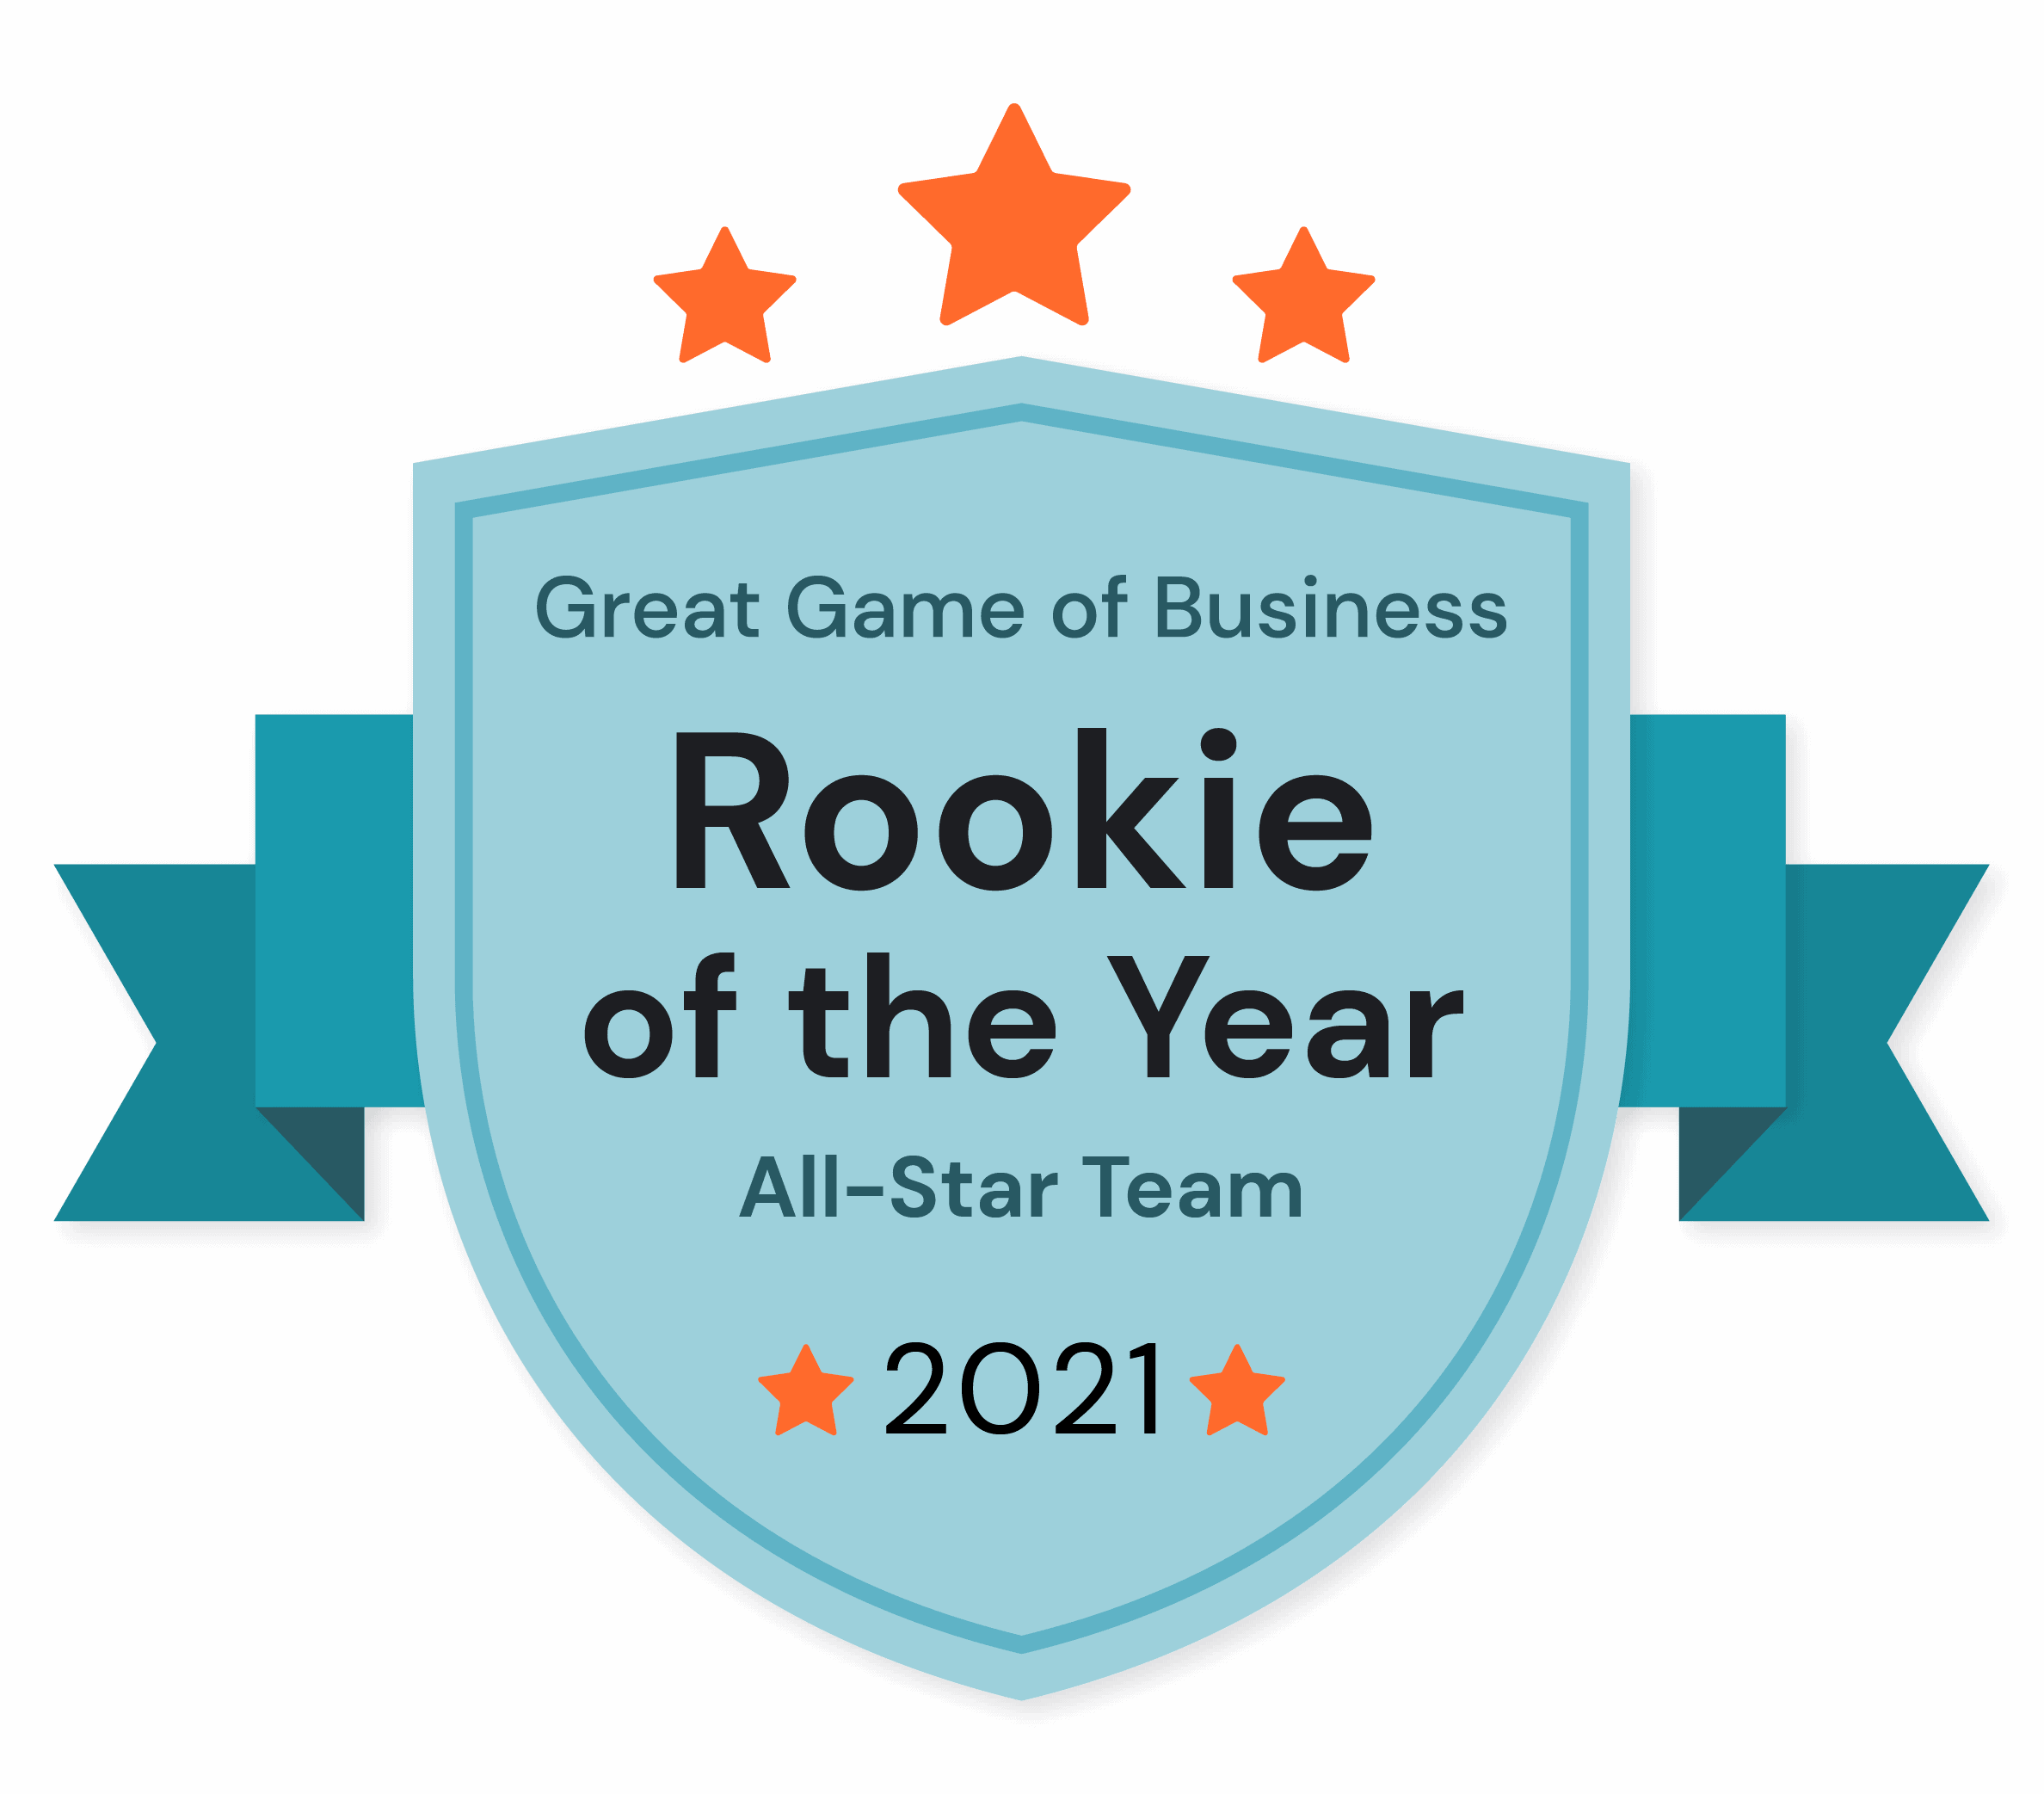 Great Game of Business - Rookie of the Year All-Star Team